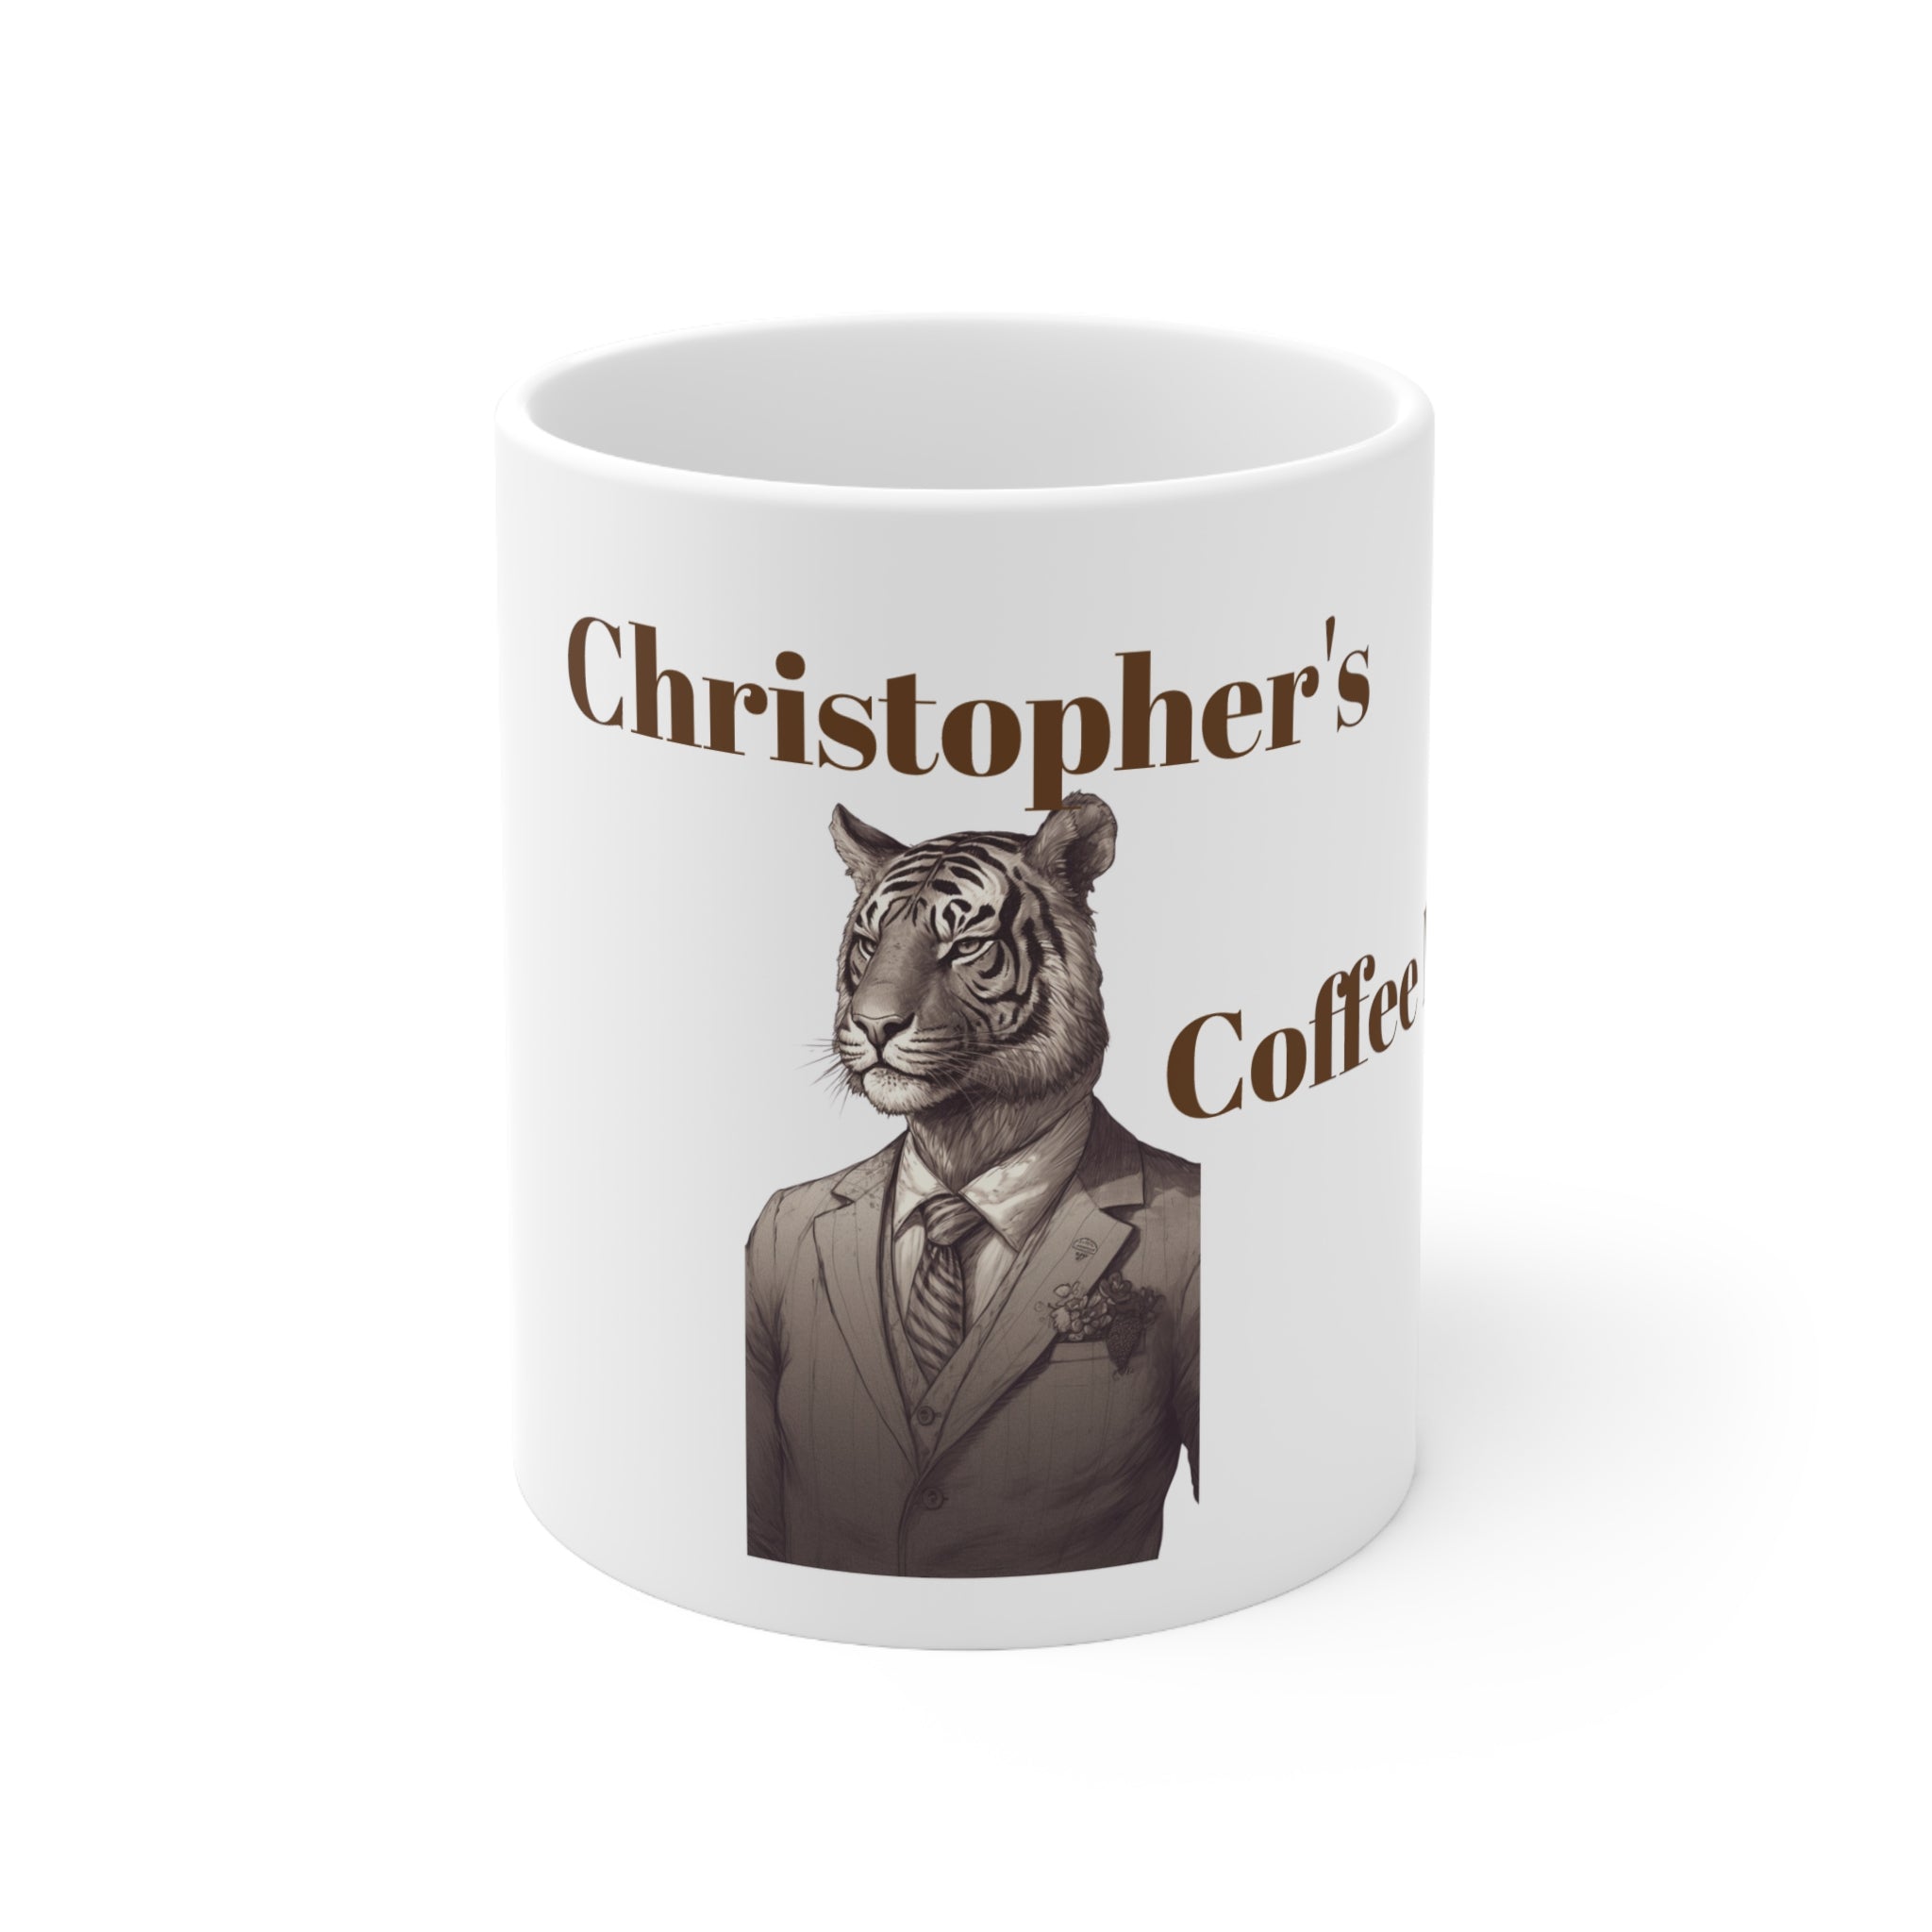 Christopher's Coffee Mug 11oz - Tiger in CEO Suit - Unique Ceramic Gift for Office